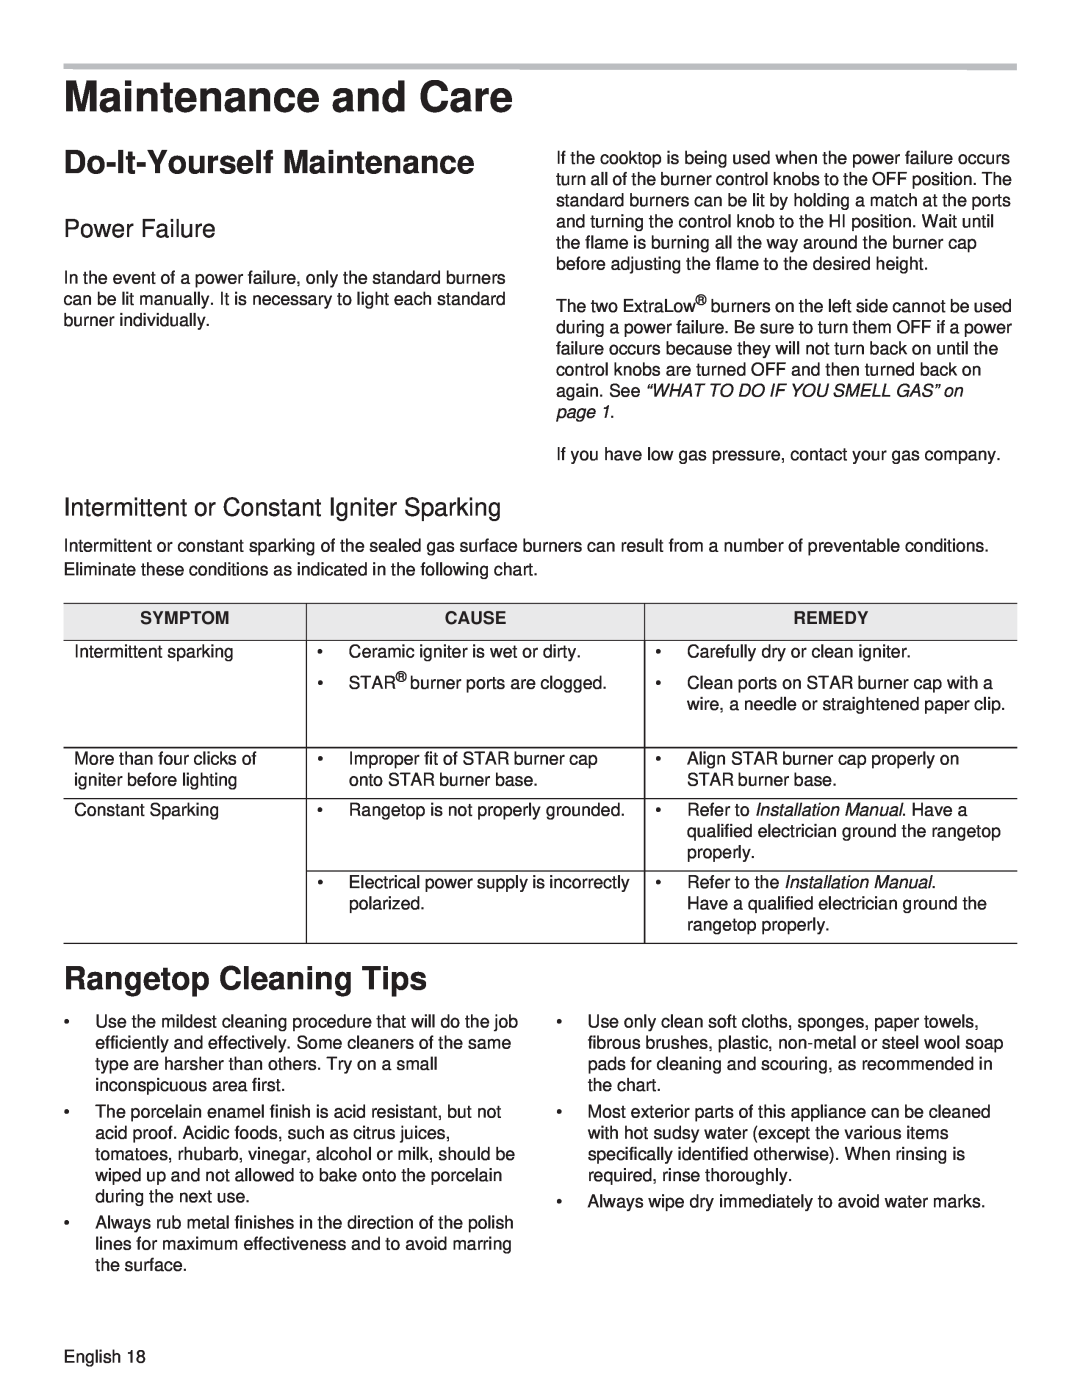 Thermador PCG30 Maintenance and Care, Do-It-Yourself Maintenance, Rangetop Cleaning Tips, Refer to the Installation Manual 